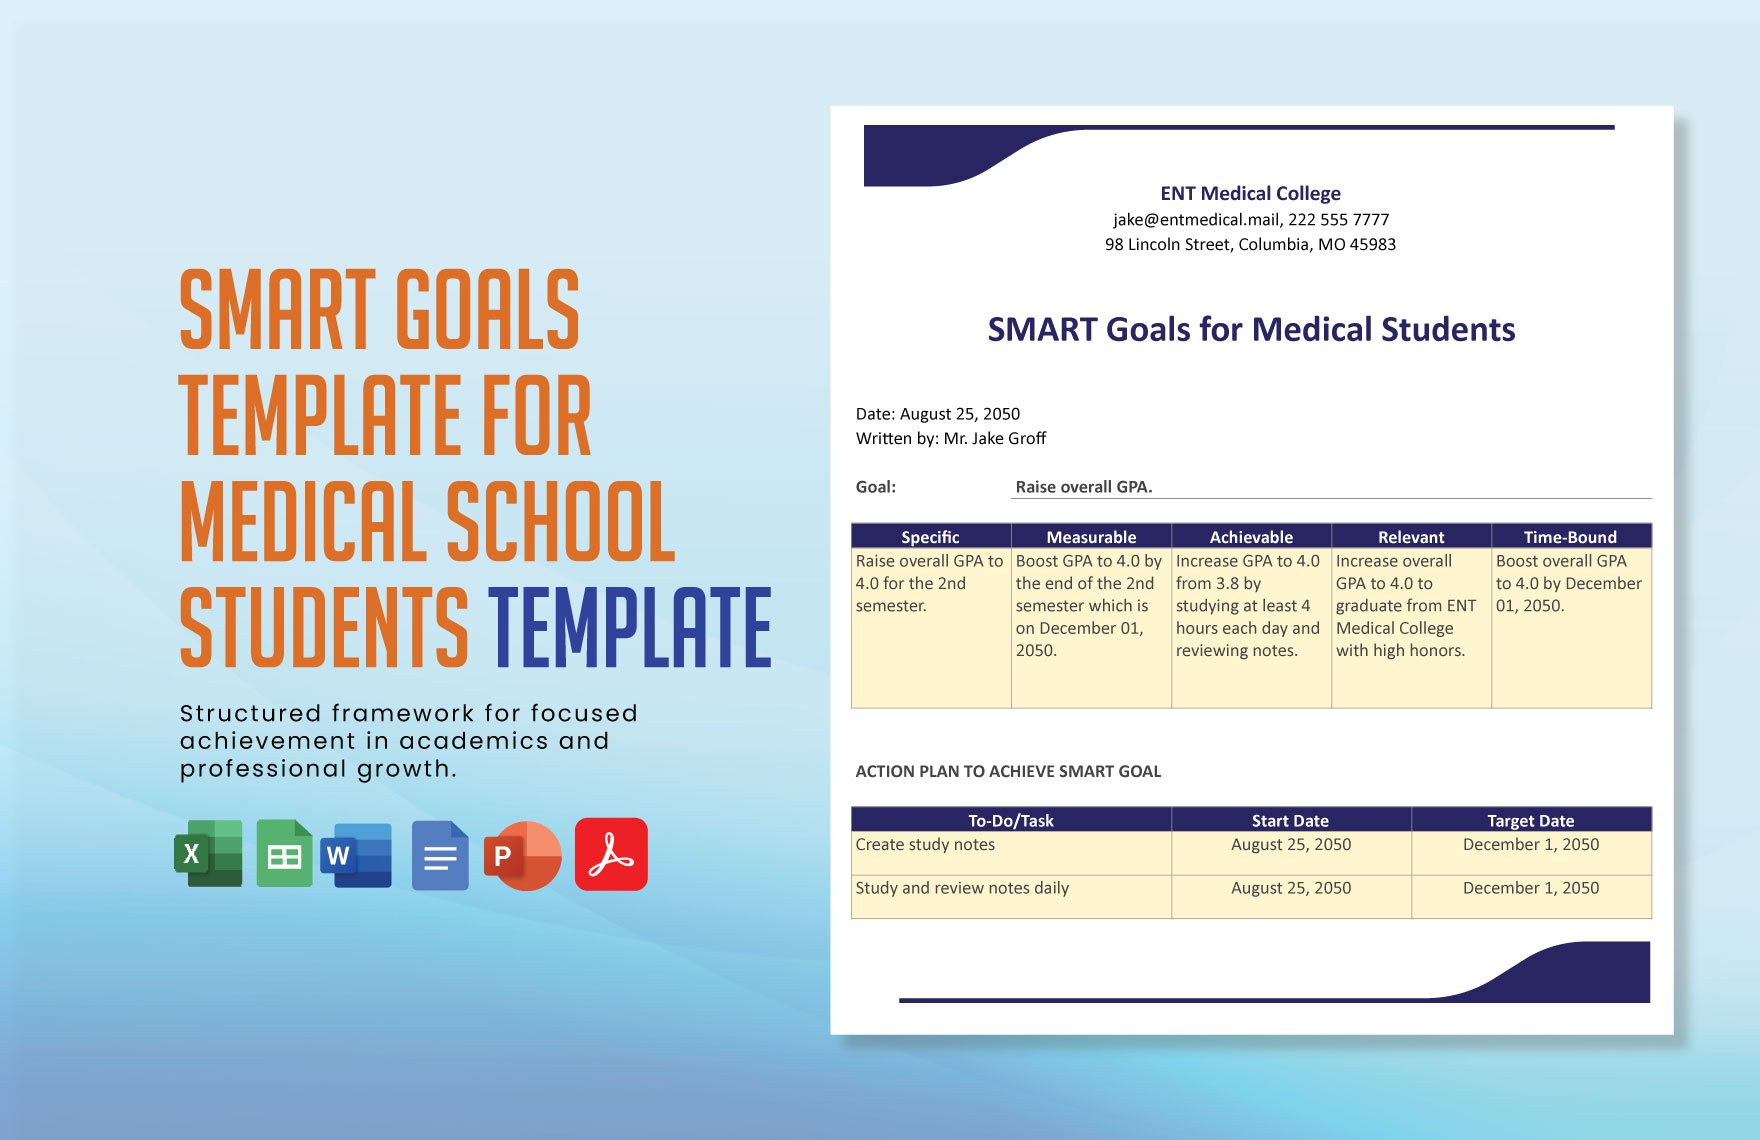 Smart Goals Template for Medical Students